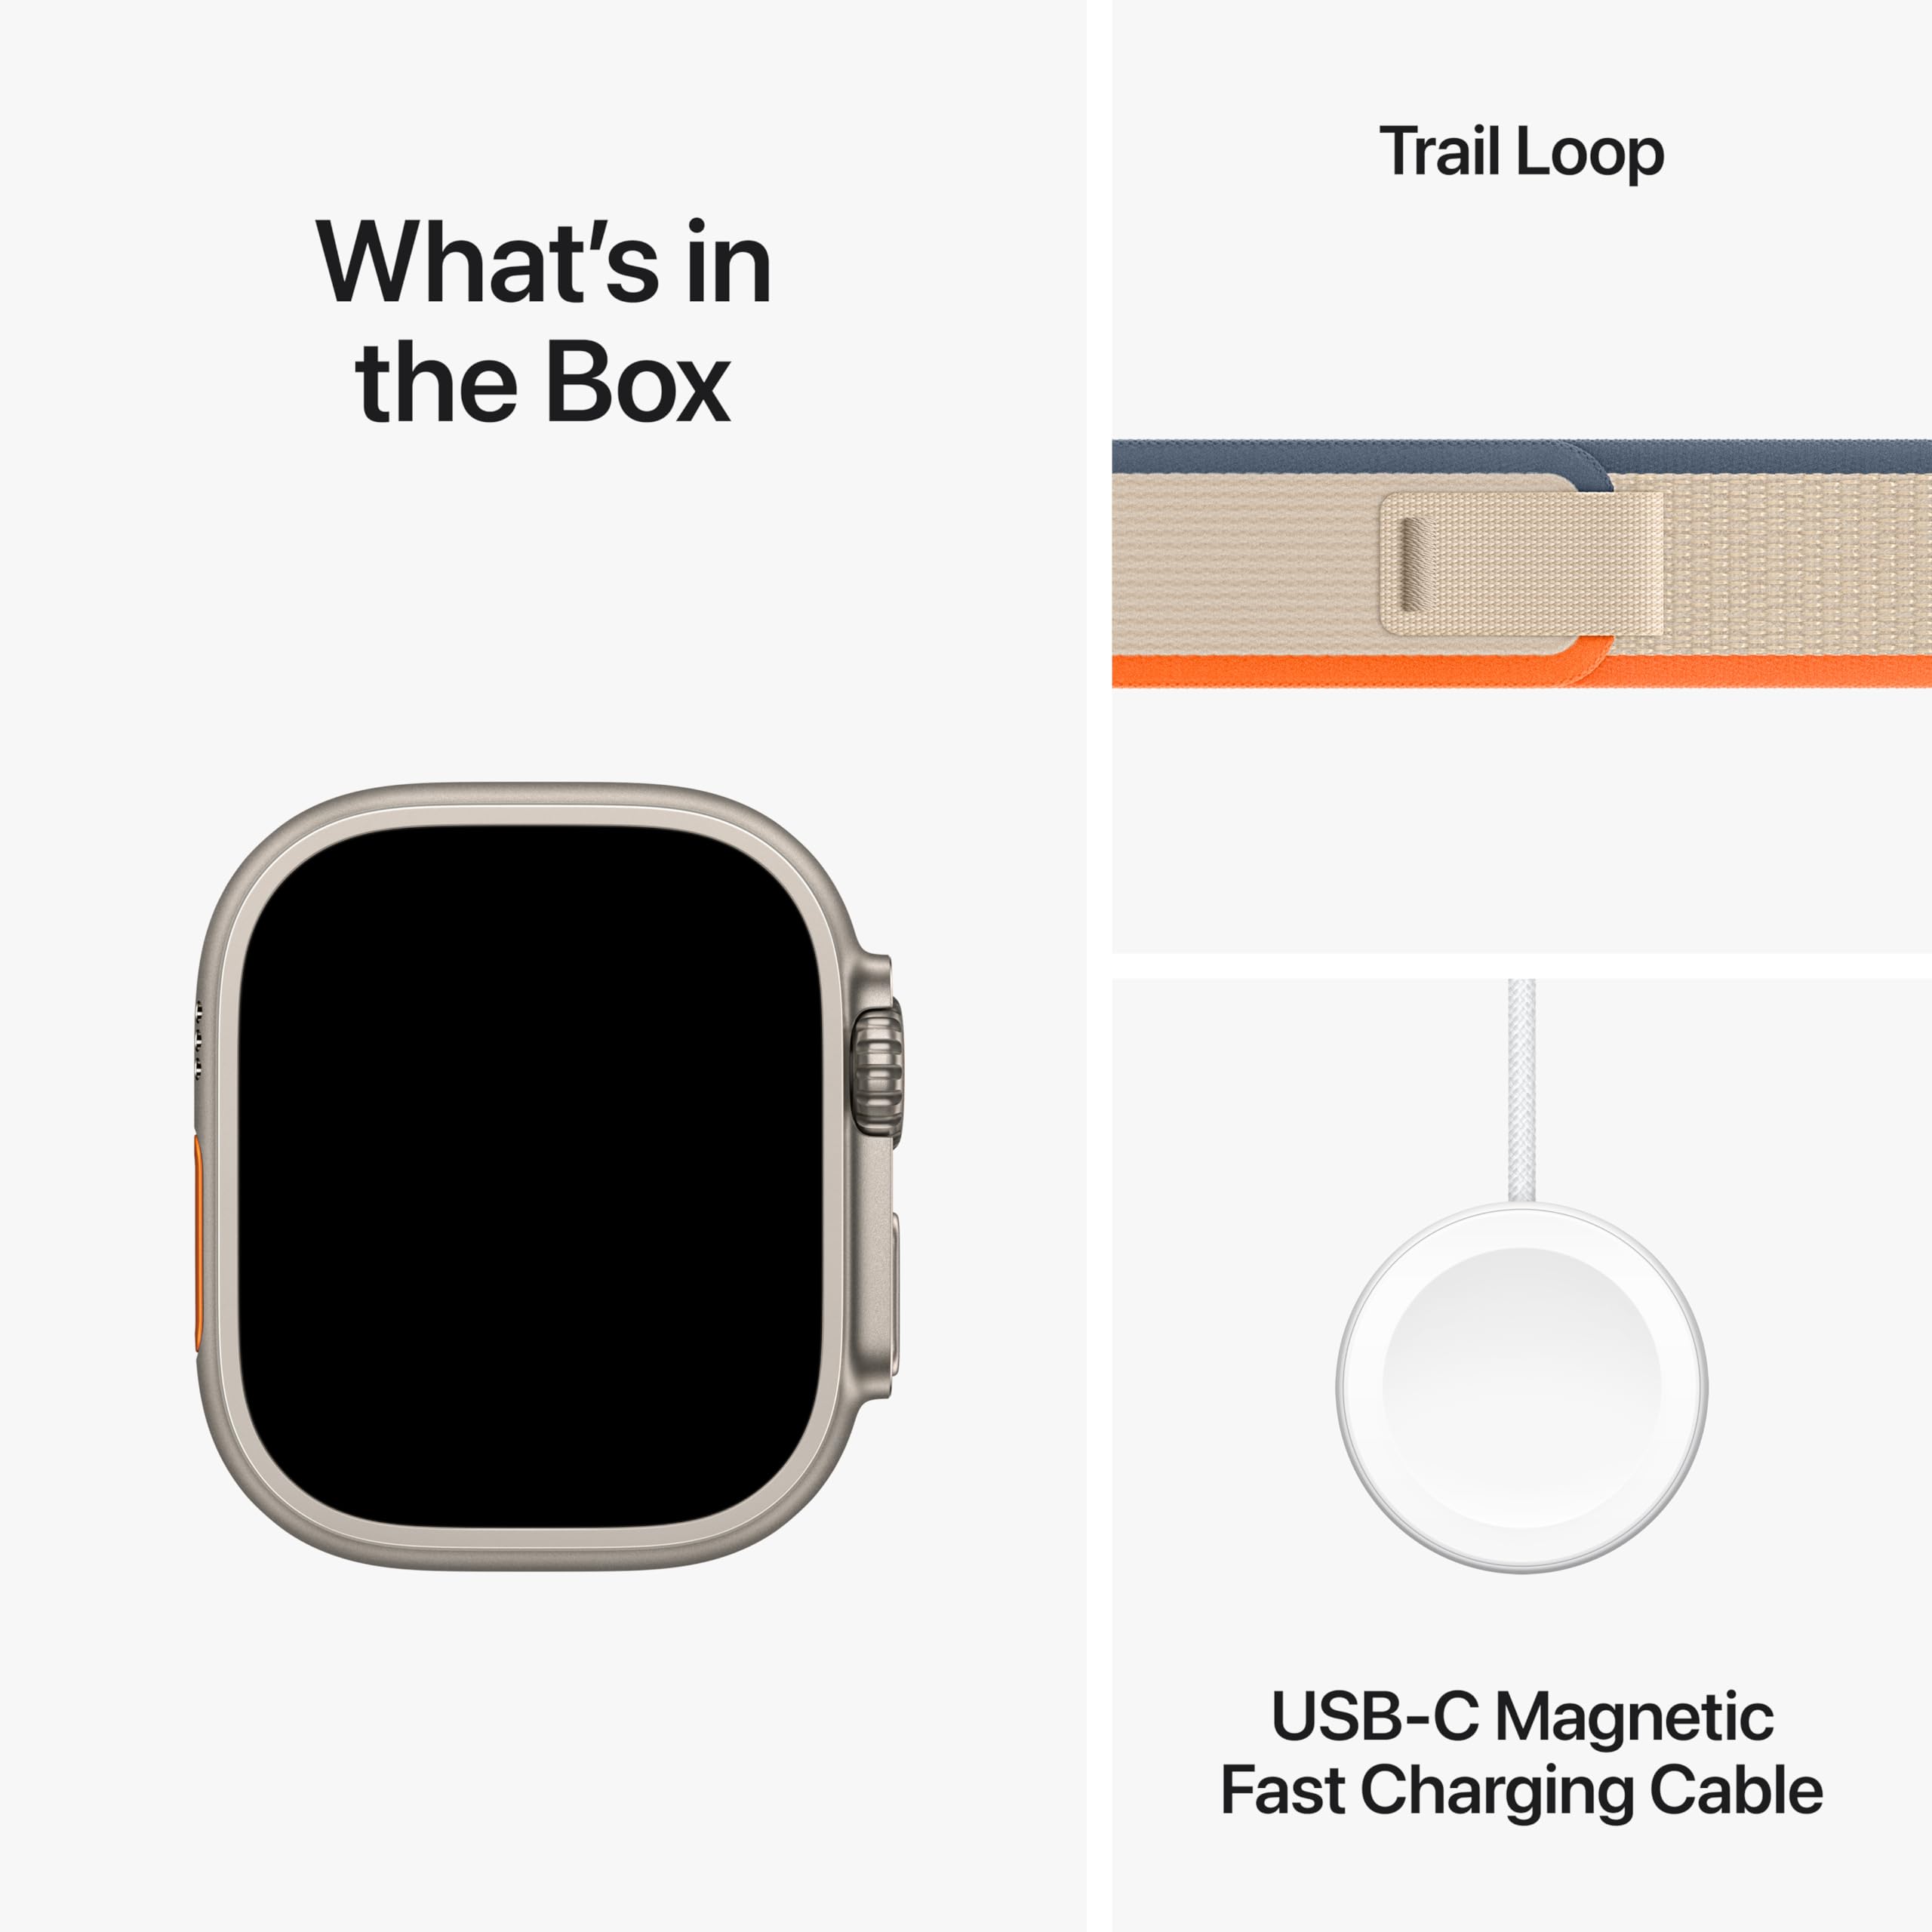 Apple Watch Ultra 2, Trail Loop Band for all workouts